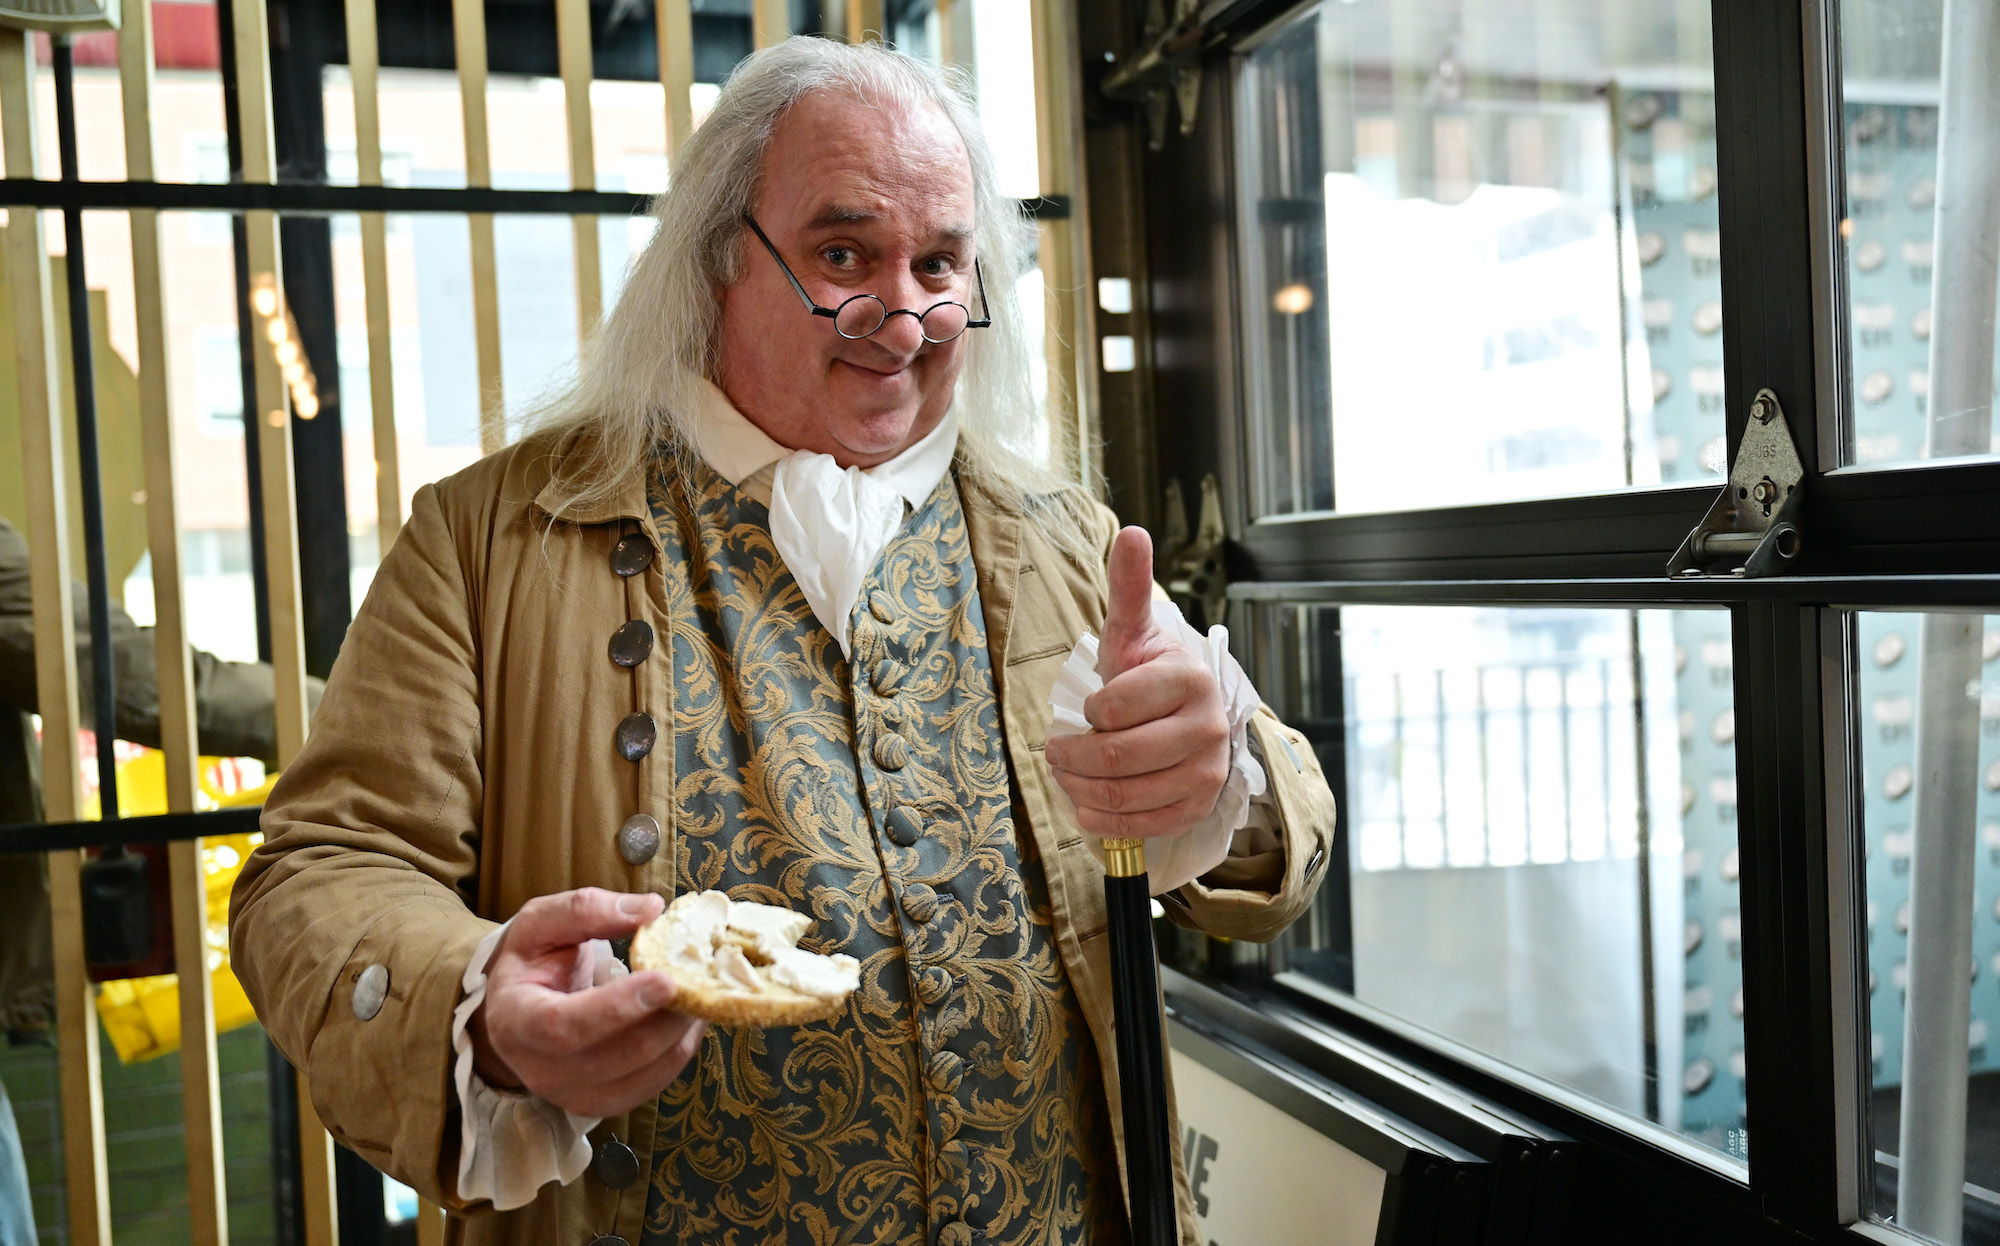 PHILADELPHIA, PENNSYLVANIA - FEBRUARY 22: Ben Franklin Impersonator, Robert DeVitis attends the pre-launch of Oatly's new plant-based Cream Cheese exclusively in Philadelphia at Spread Bagelry on February 22, 2023 in Philadelphia, Pennsylvania. (Photo by Lisa Lake/Getty Images for Oatly)